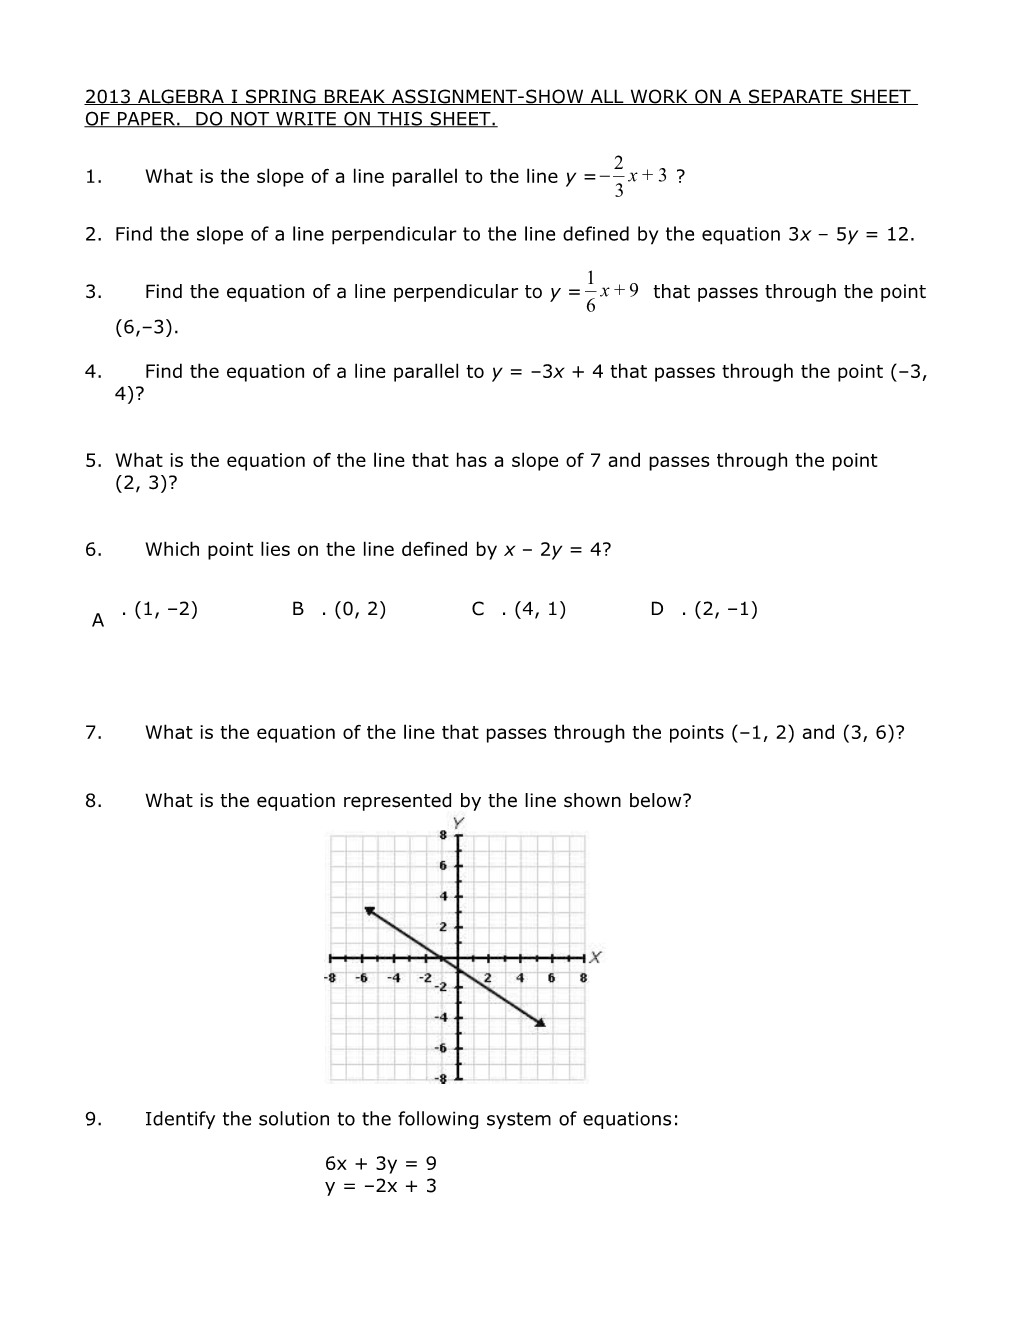 2013 Algebra I Spring Break Assignment-Show All Work on a Separate Sheet of Paper. Do Not